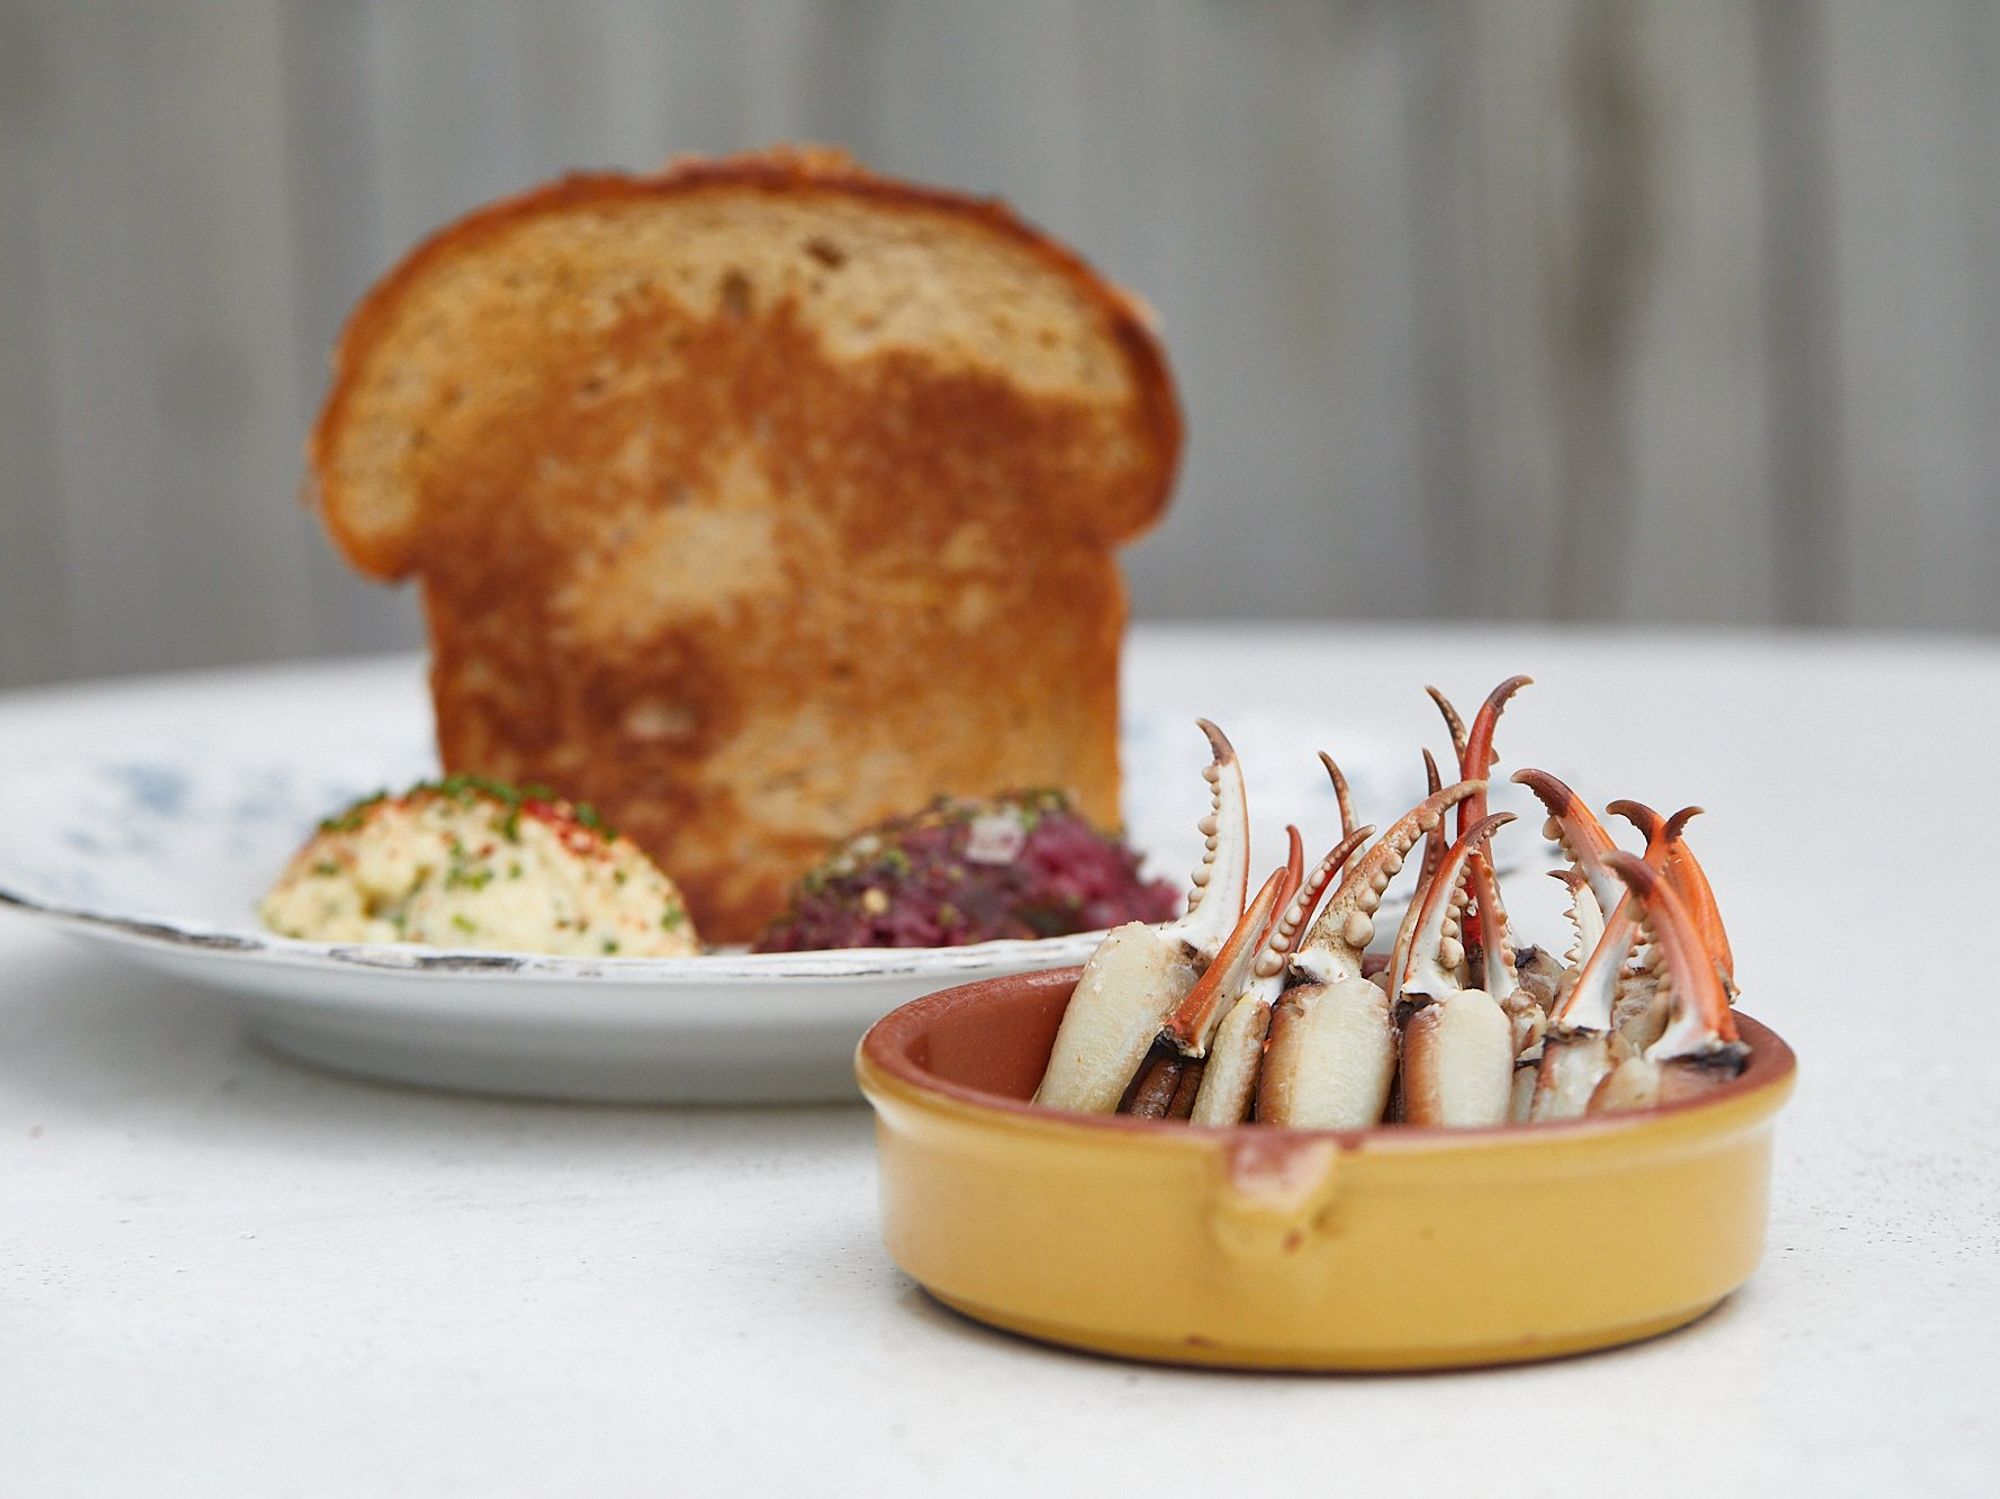 Lenoir crab fingers and toast